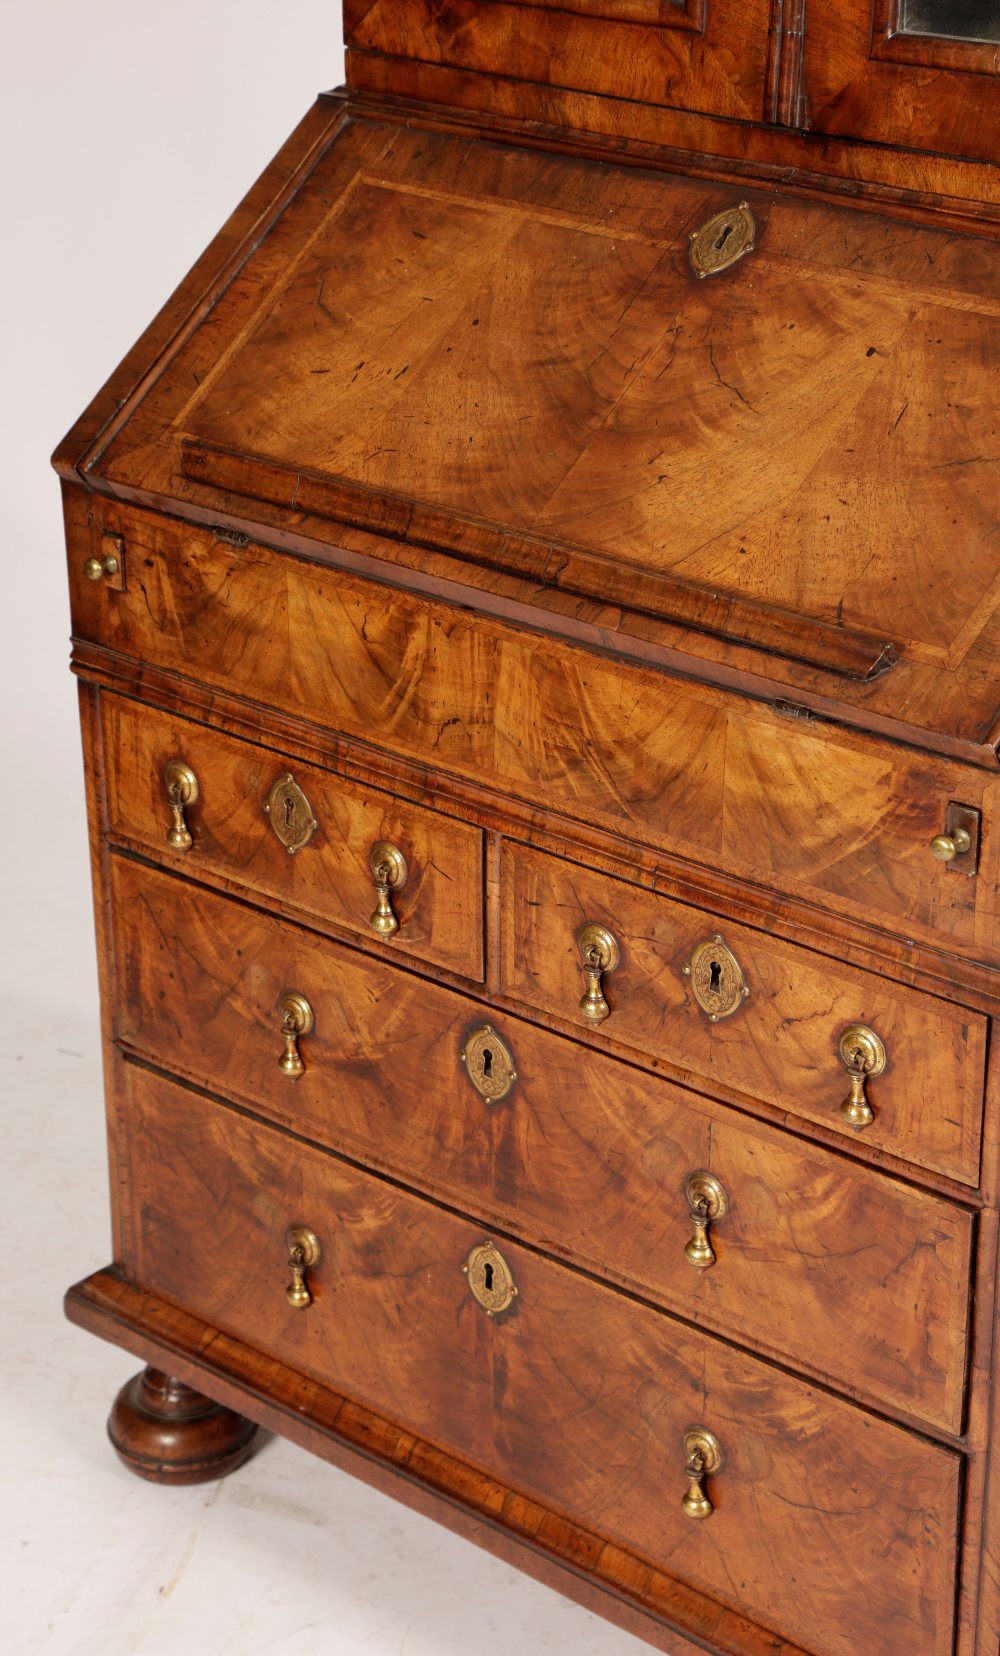 A GEORGE I WALNUT BUREAU BOOKCASE C.1715-20 with cross and feather banding, the moulded cornice - Image 2 of 3